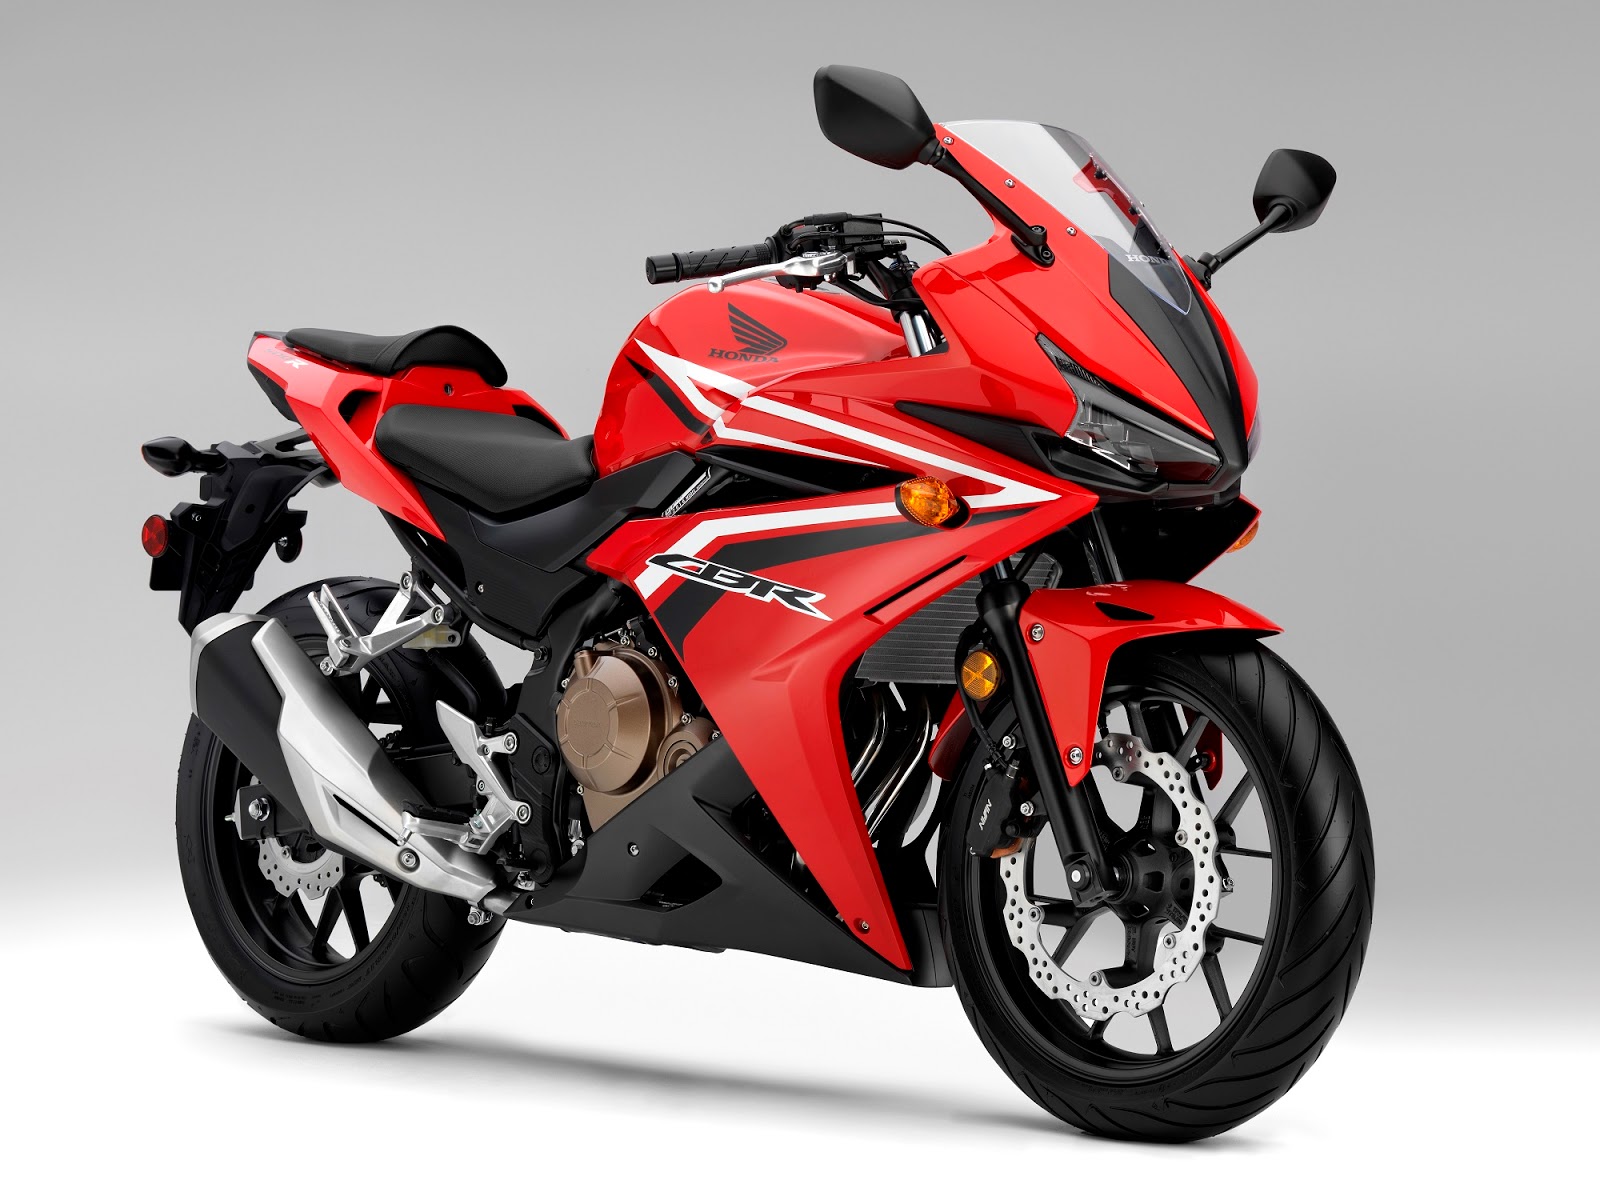 Dunia Otomotifbroblogspotcoid ALL NEW CBR150R FACELIFT 2016